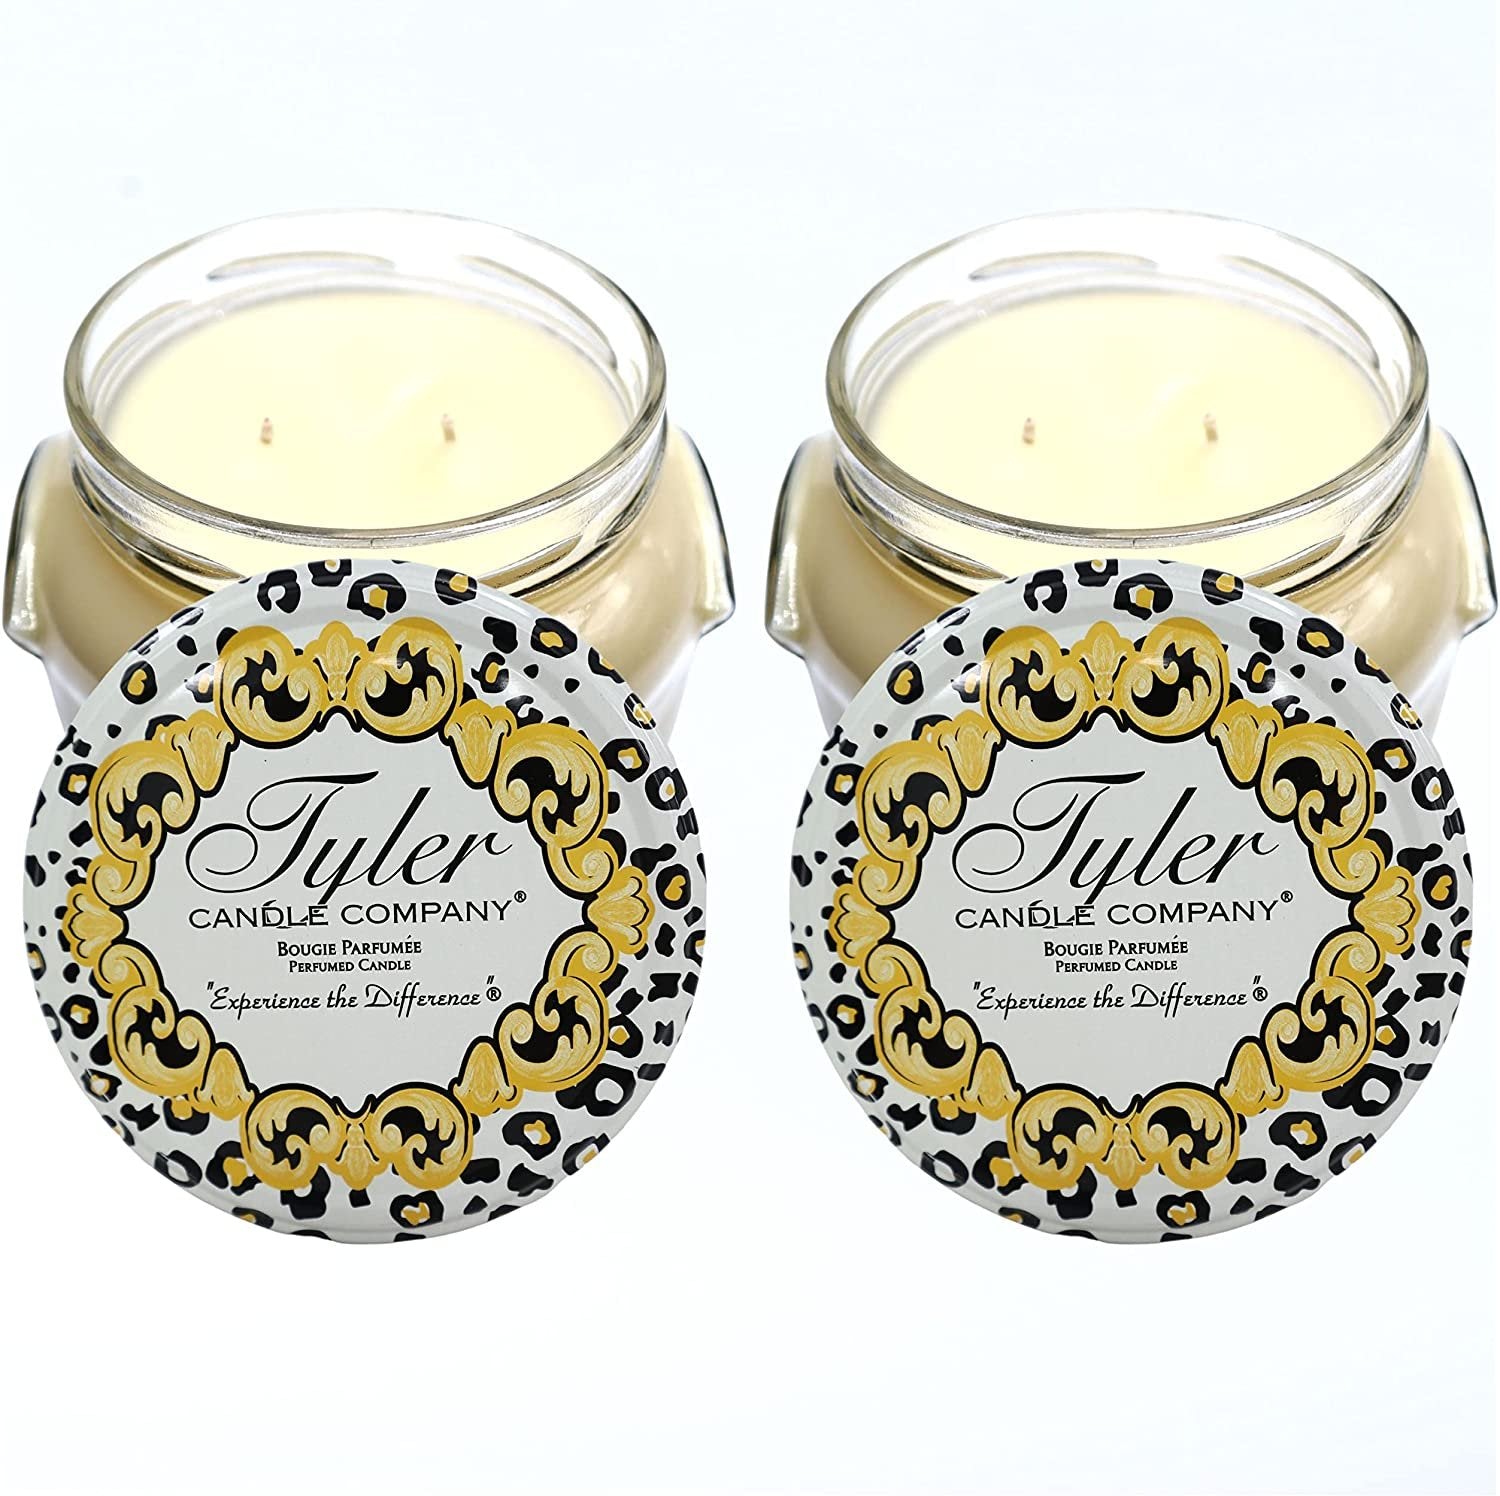 Tyler Candle Company, Entitled Jar Candle, Scented Candles Gifts for Women, Ultimate Aromatherapy Experience, Luxurious Candles with Essential Oils, Long-Lasting Burn, Large Candle 22oz (2 Pack)